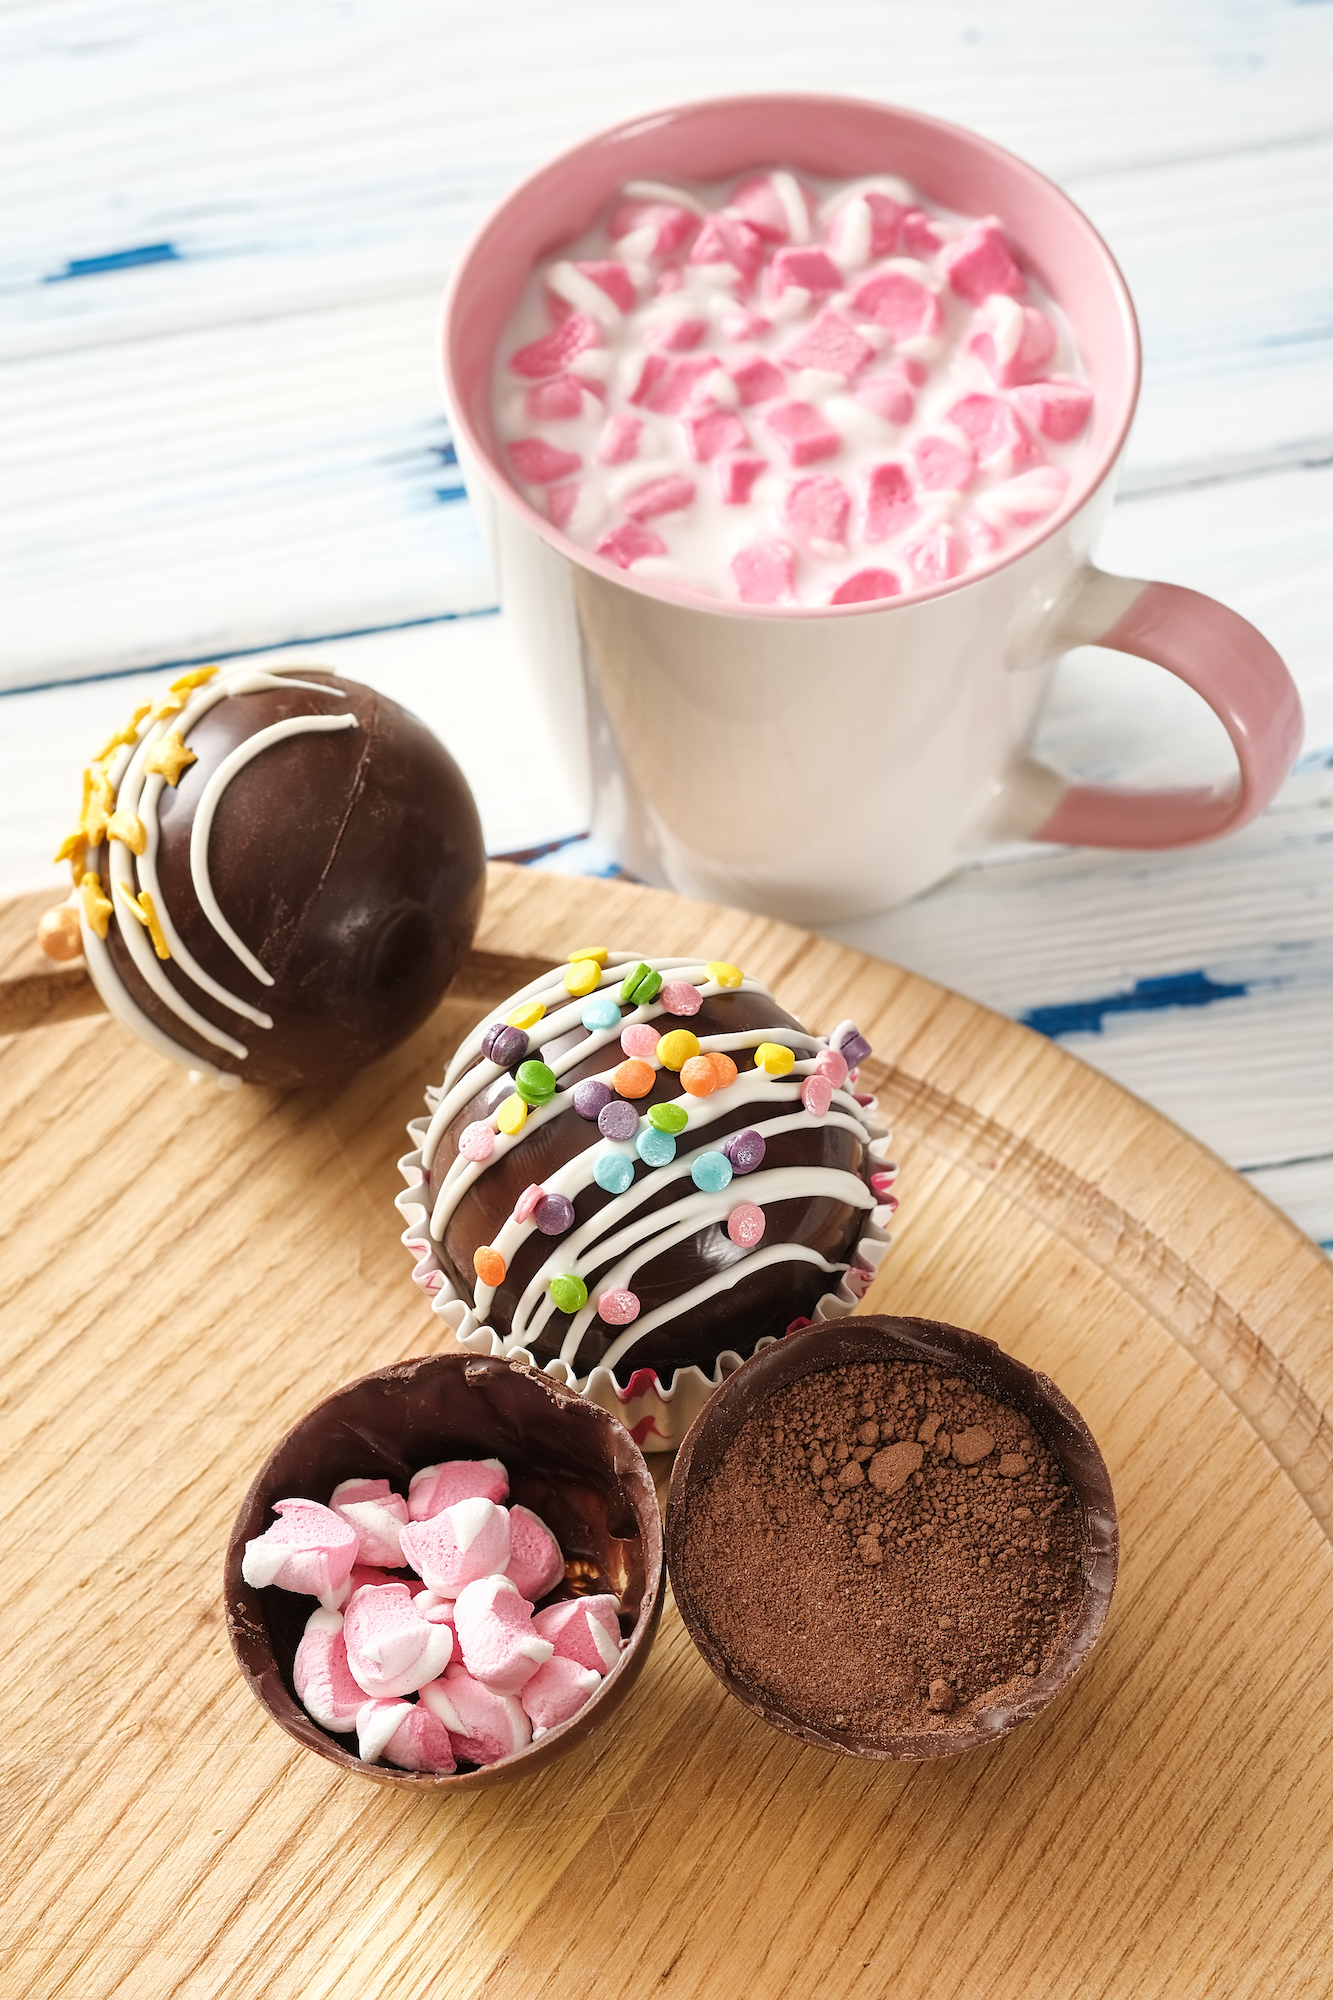 Image of hot chocolate cocoa bombs beside a description of how to increase sales of hot cocoa bombs in the food industry.